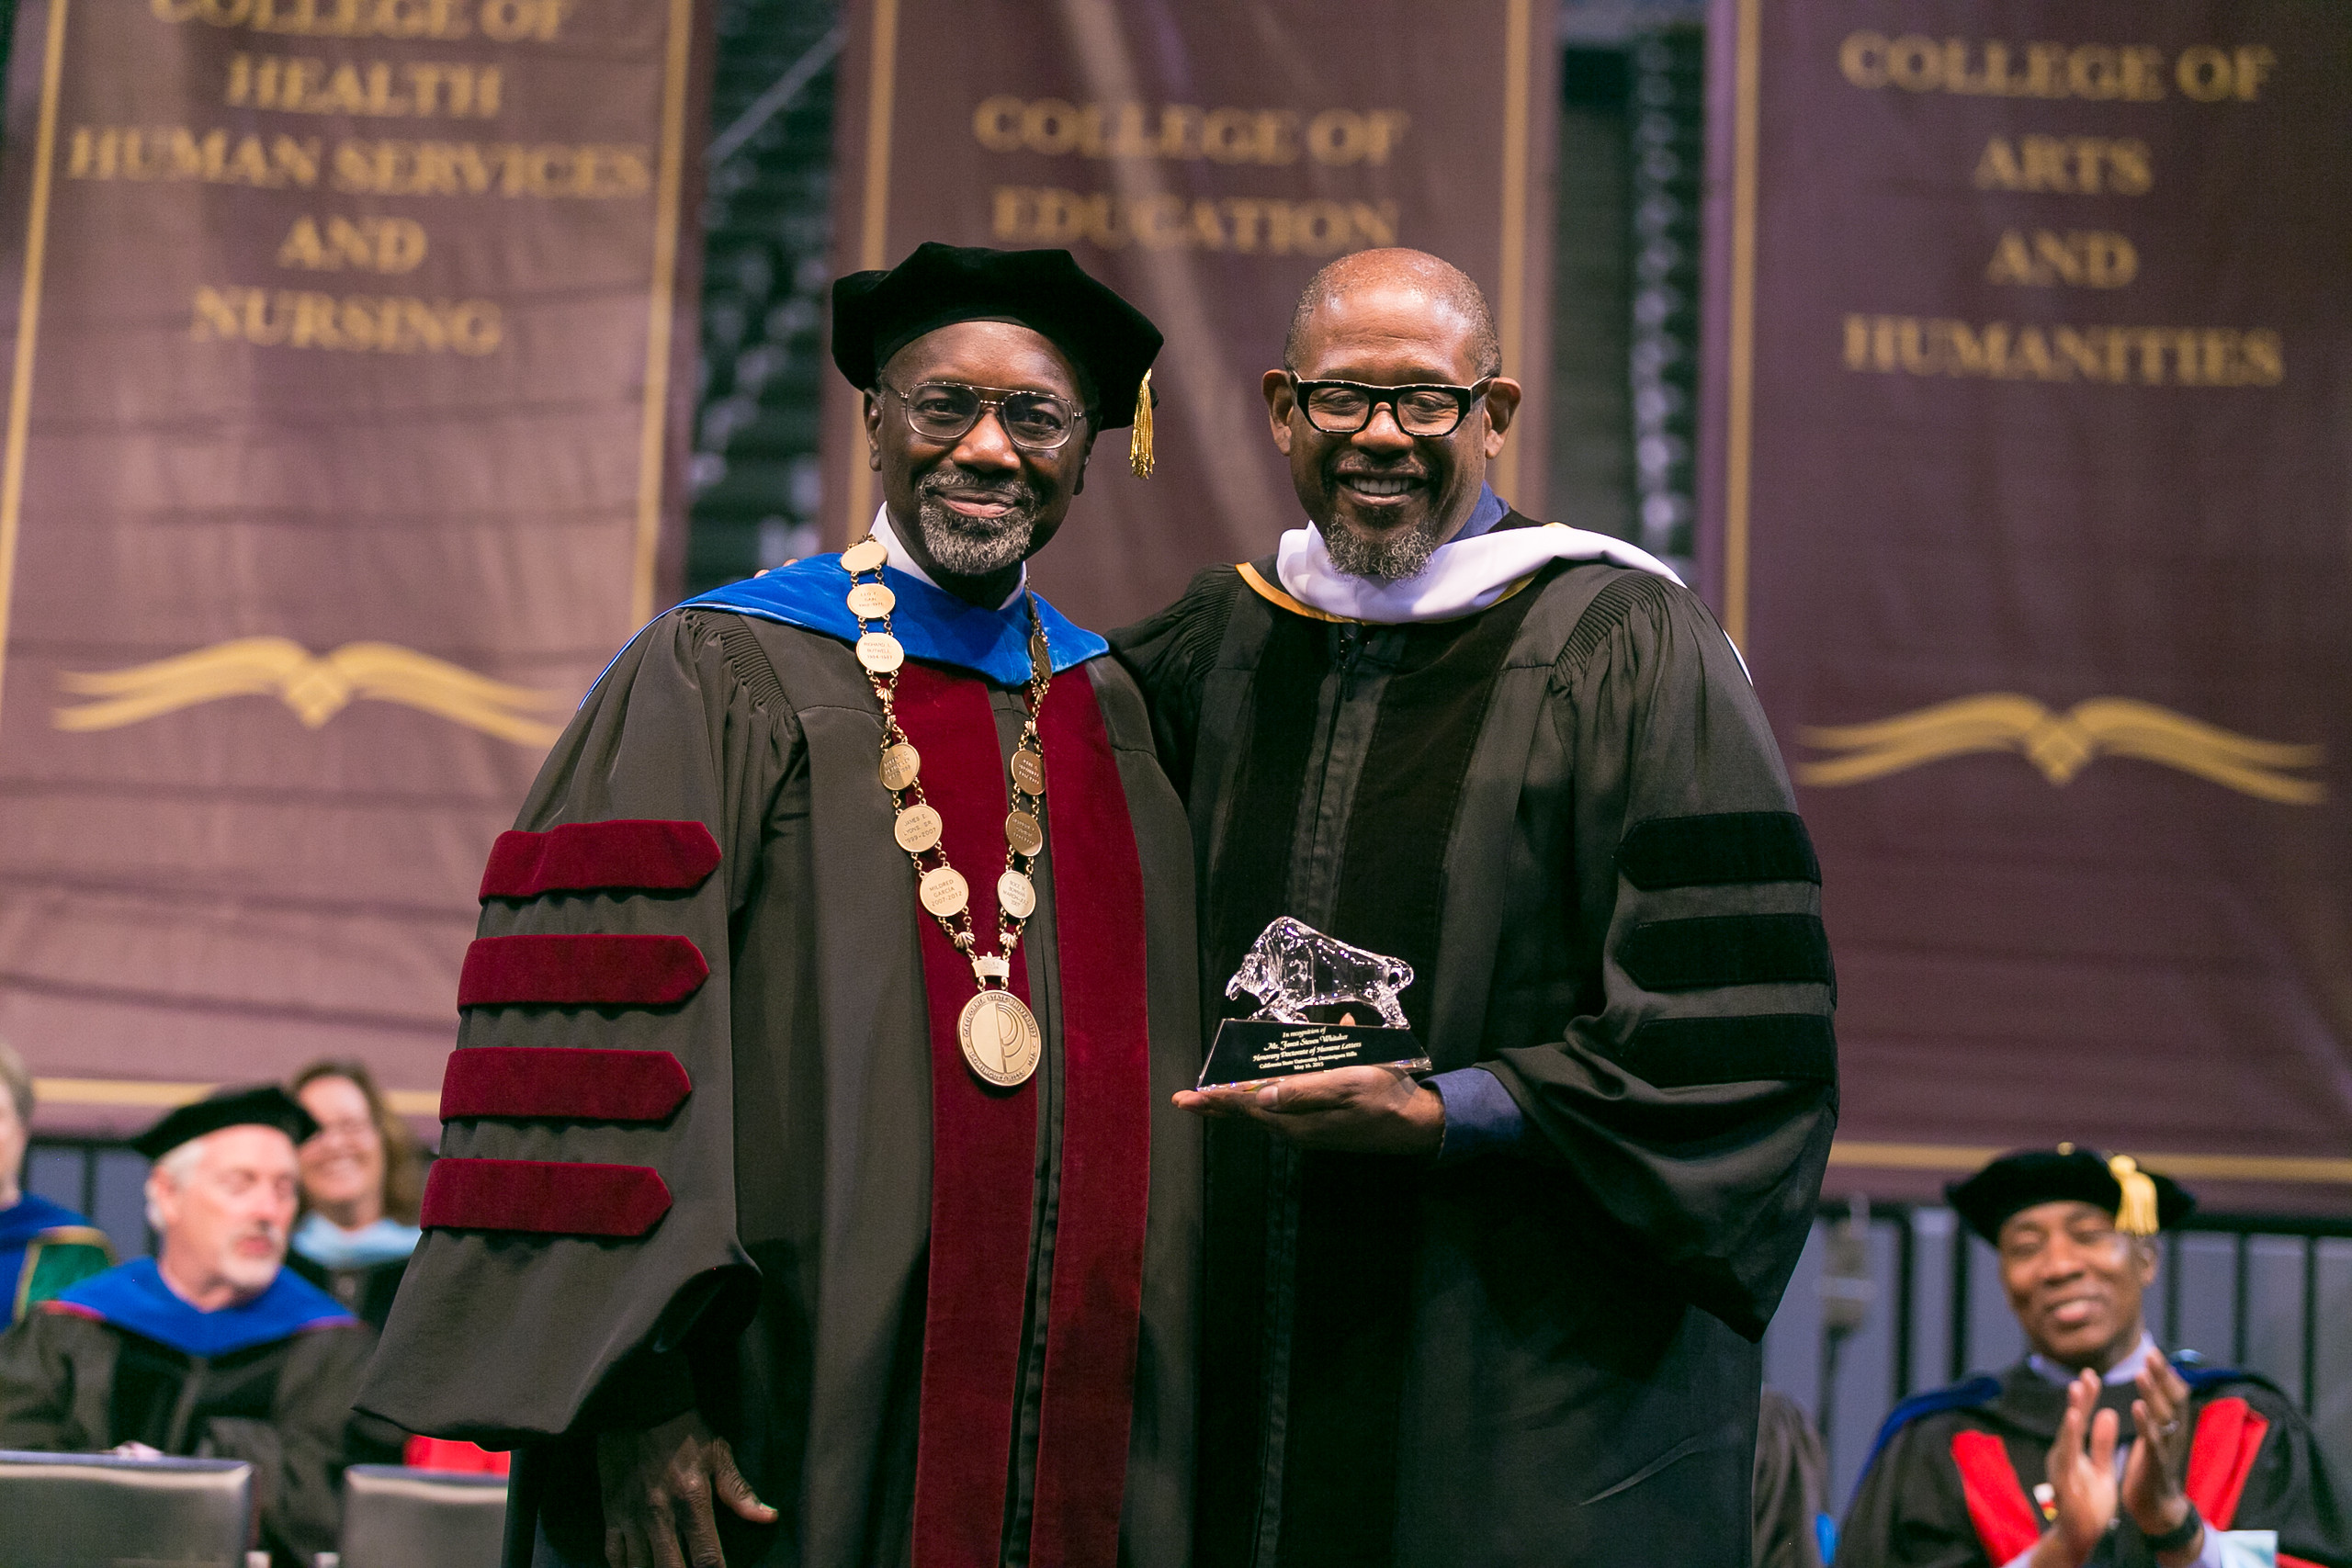 College of Arts and Humanities Commencement with President Willie Hagan and actor Forrest Whittaker